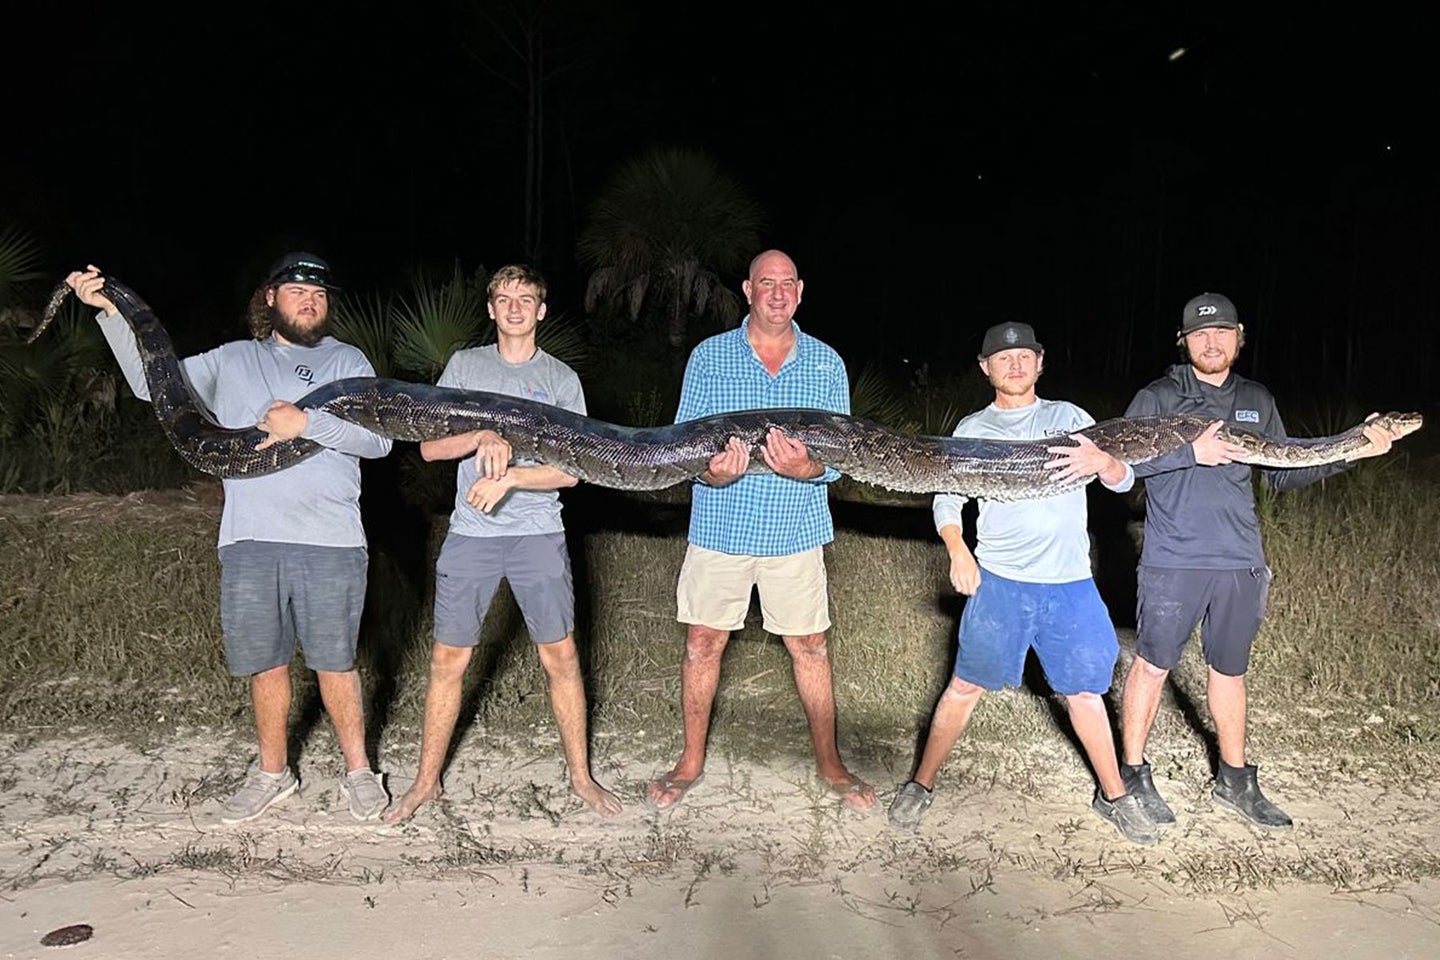 A crew of snake hunters pose with a massive Burmese python captured in the Florida's Big Cypress National Preserve.